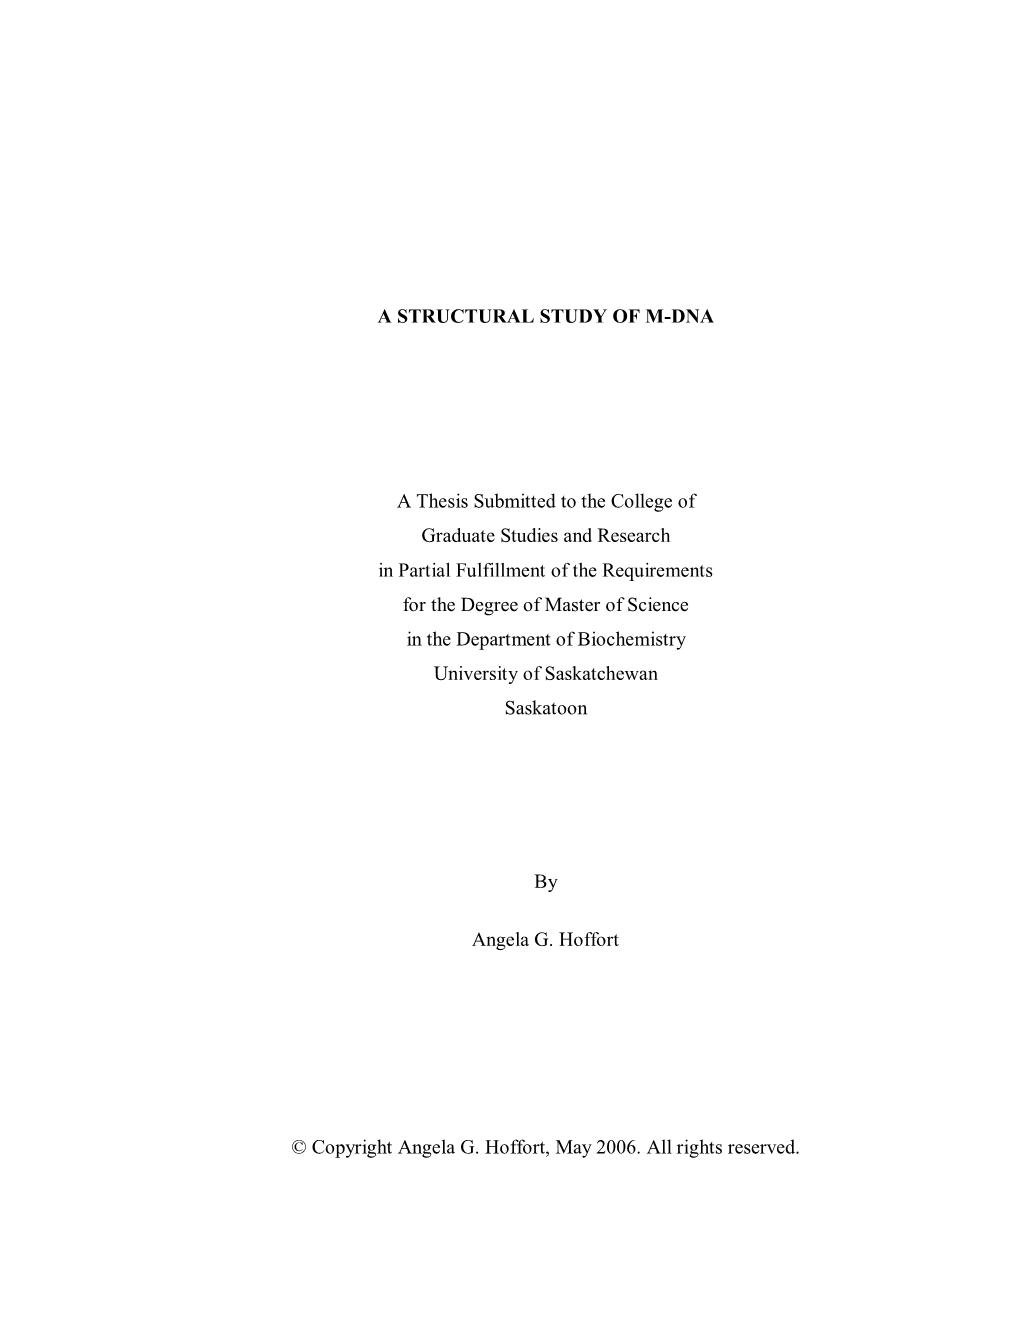 A STRUCTURAL STUDY of M-DNA a Thesis Submitted to the College